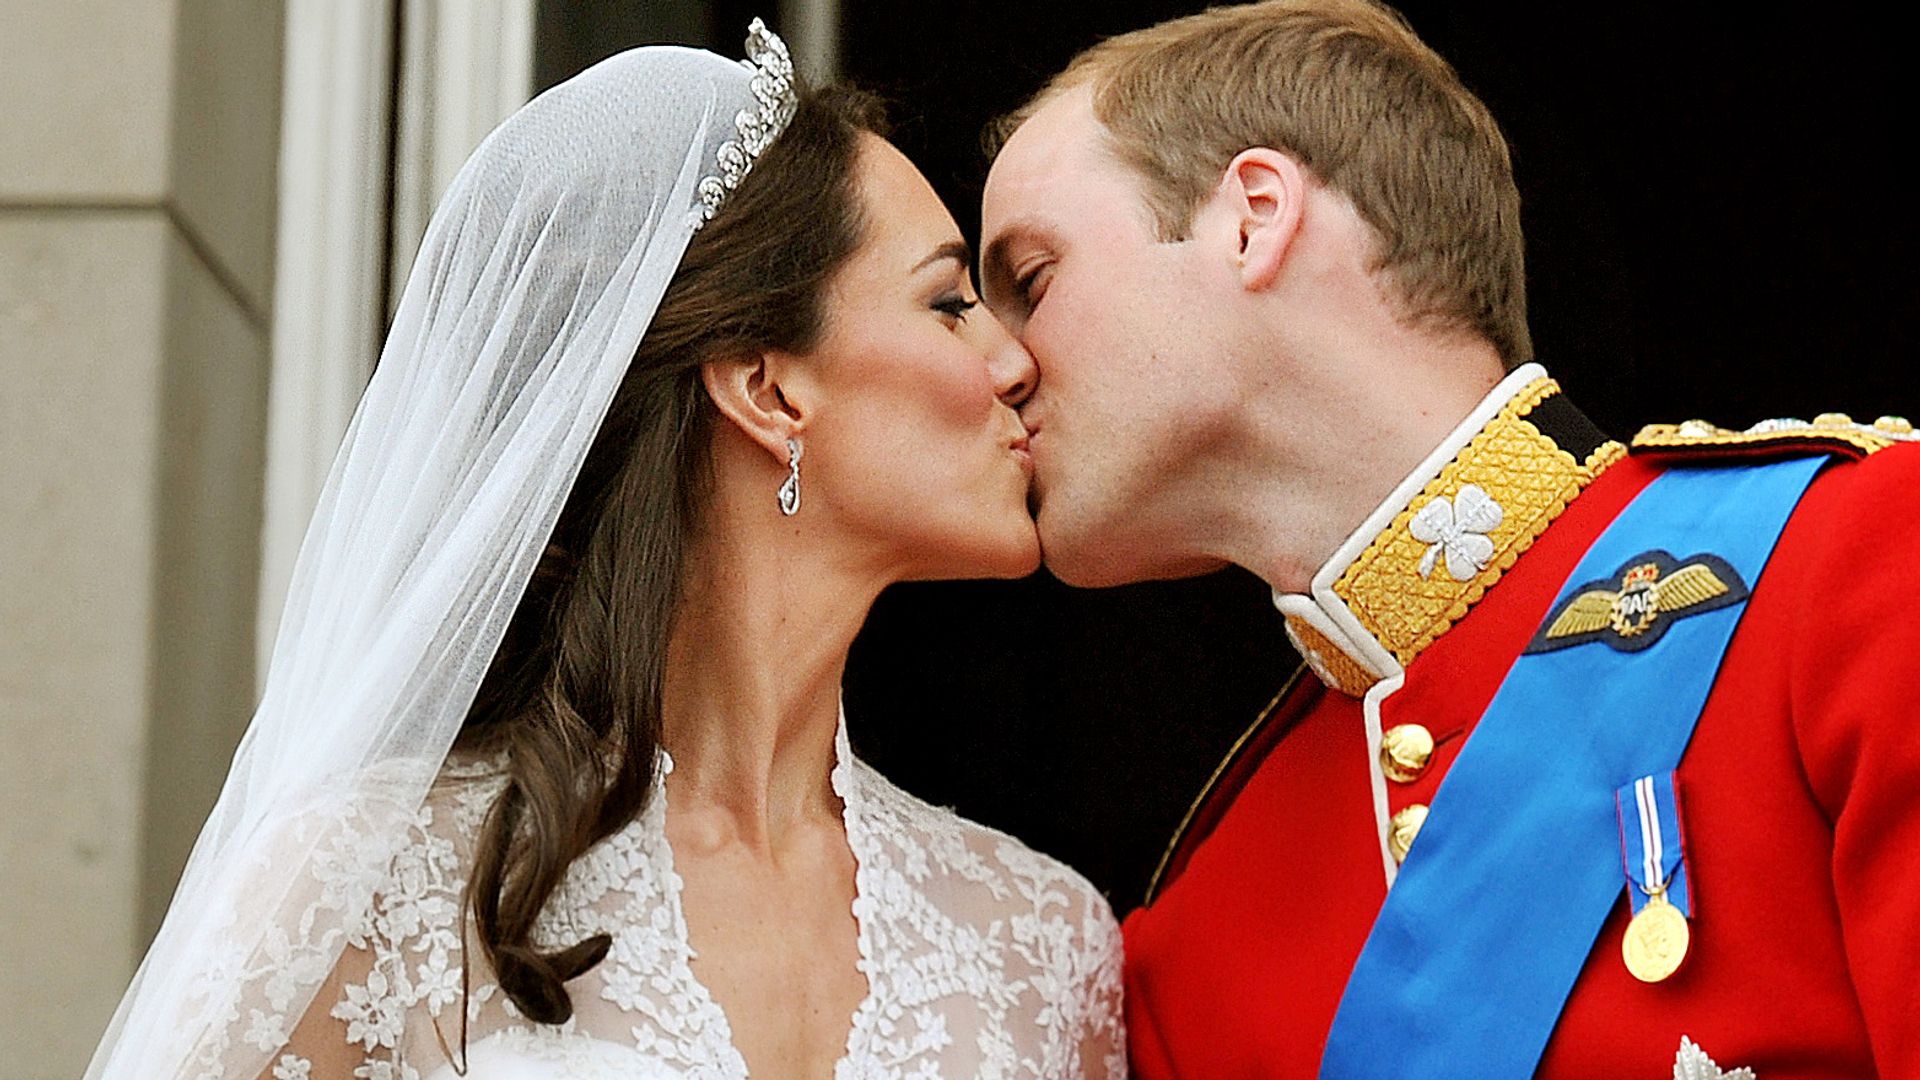 Prince William in a red military uniform kissing his new bride Kate Middleton